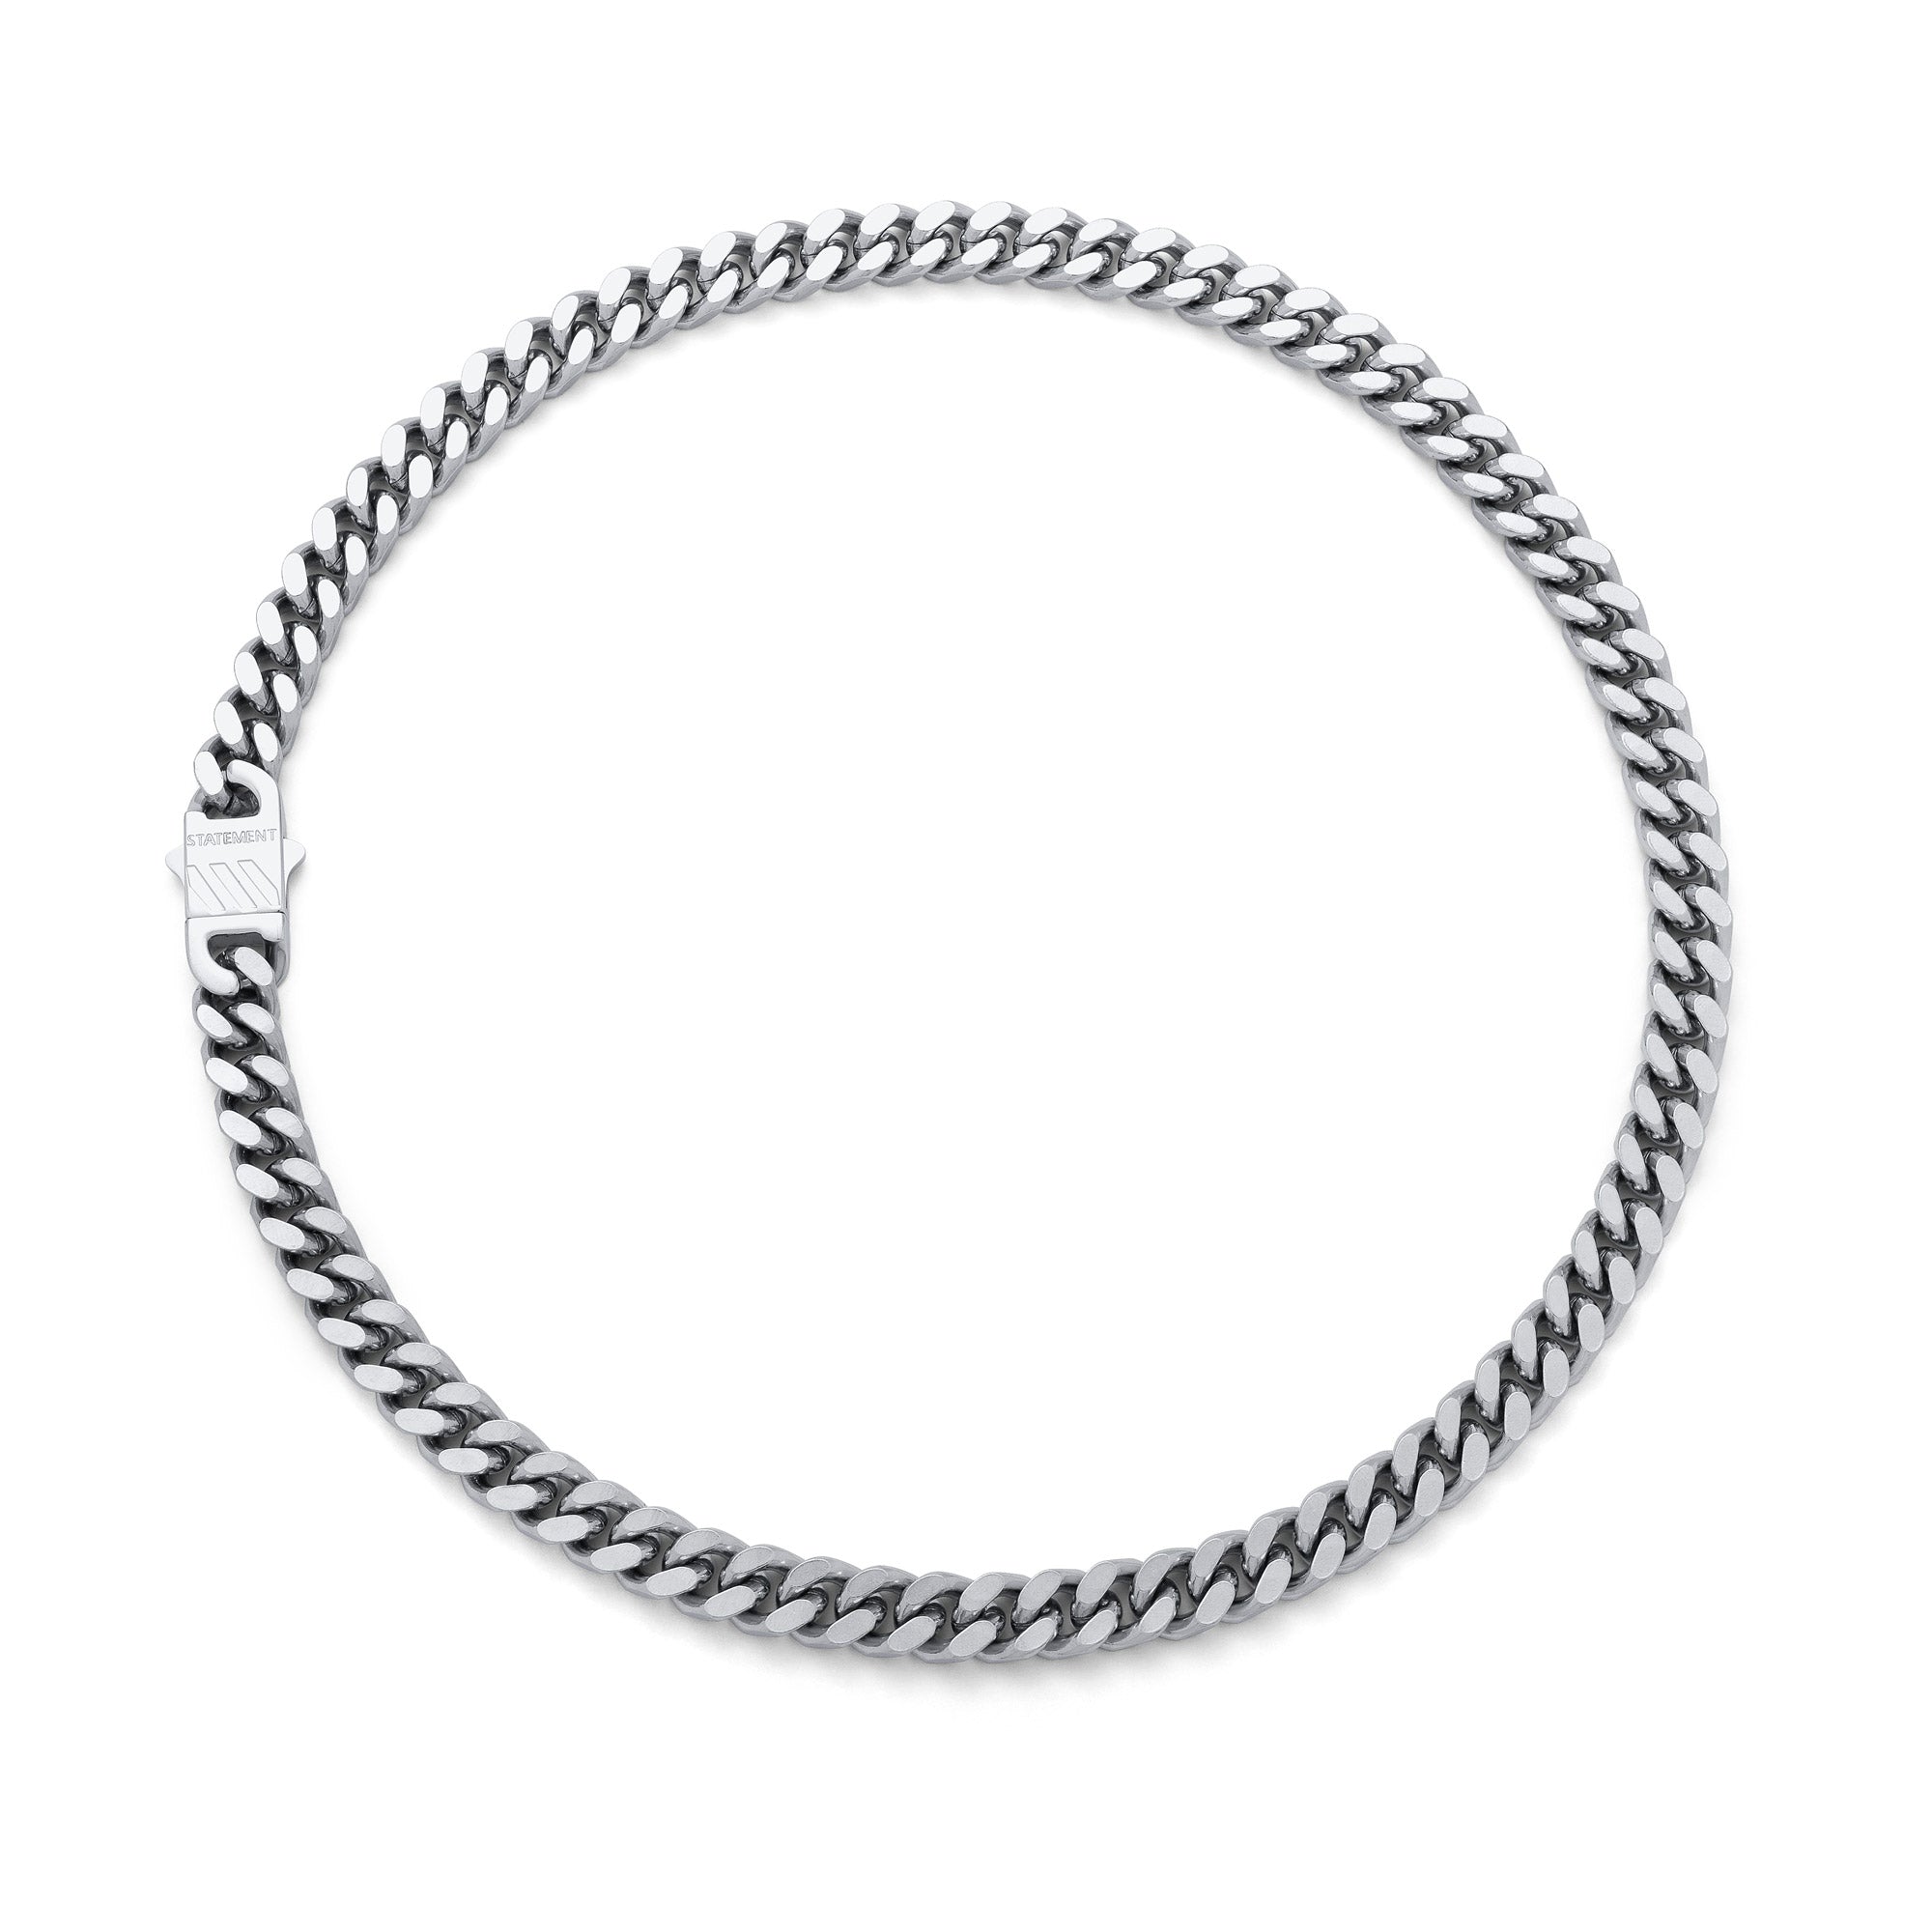 How to care for stainless steel jewelry - Statement Collective